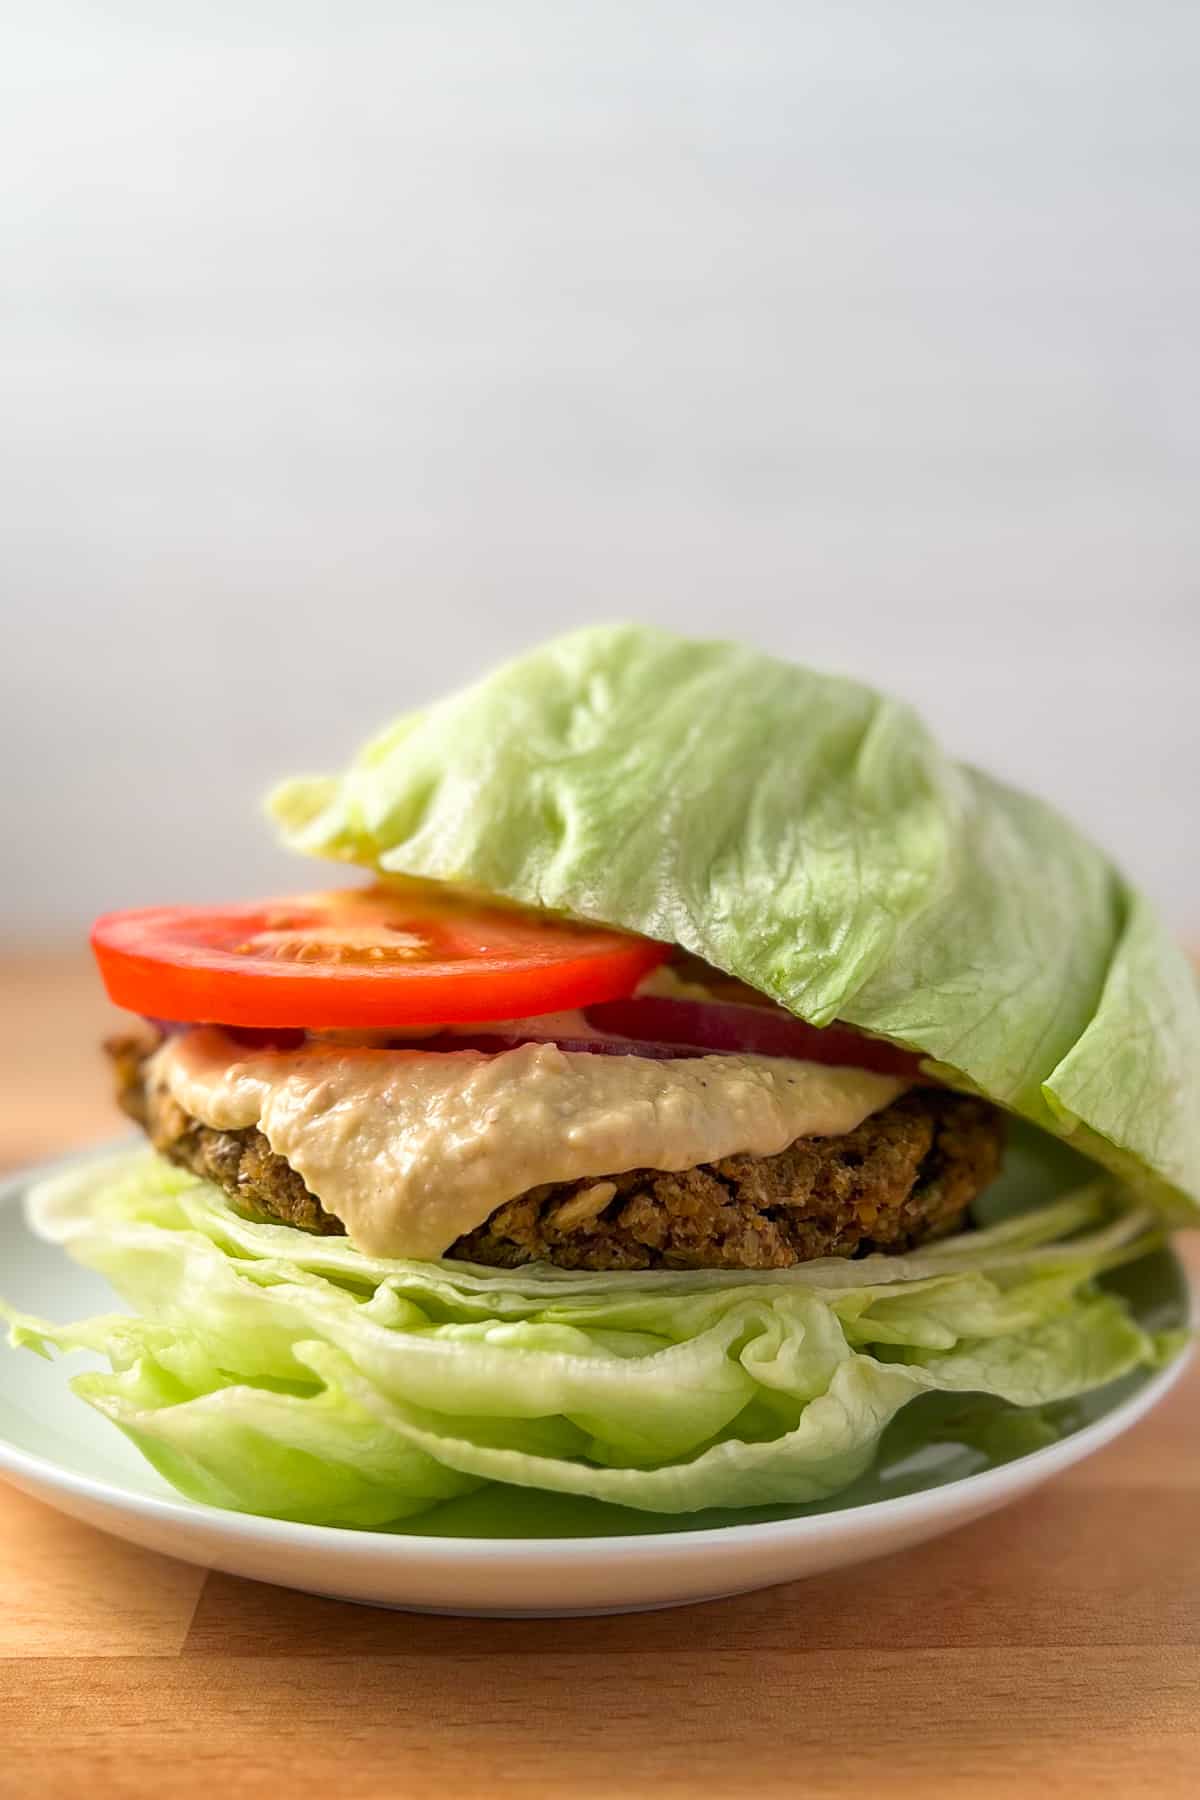 The completed chickpea burger with lettuce bun topped with sliced tomato, onion and hummus sauce.